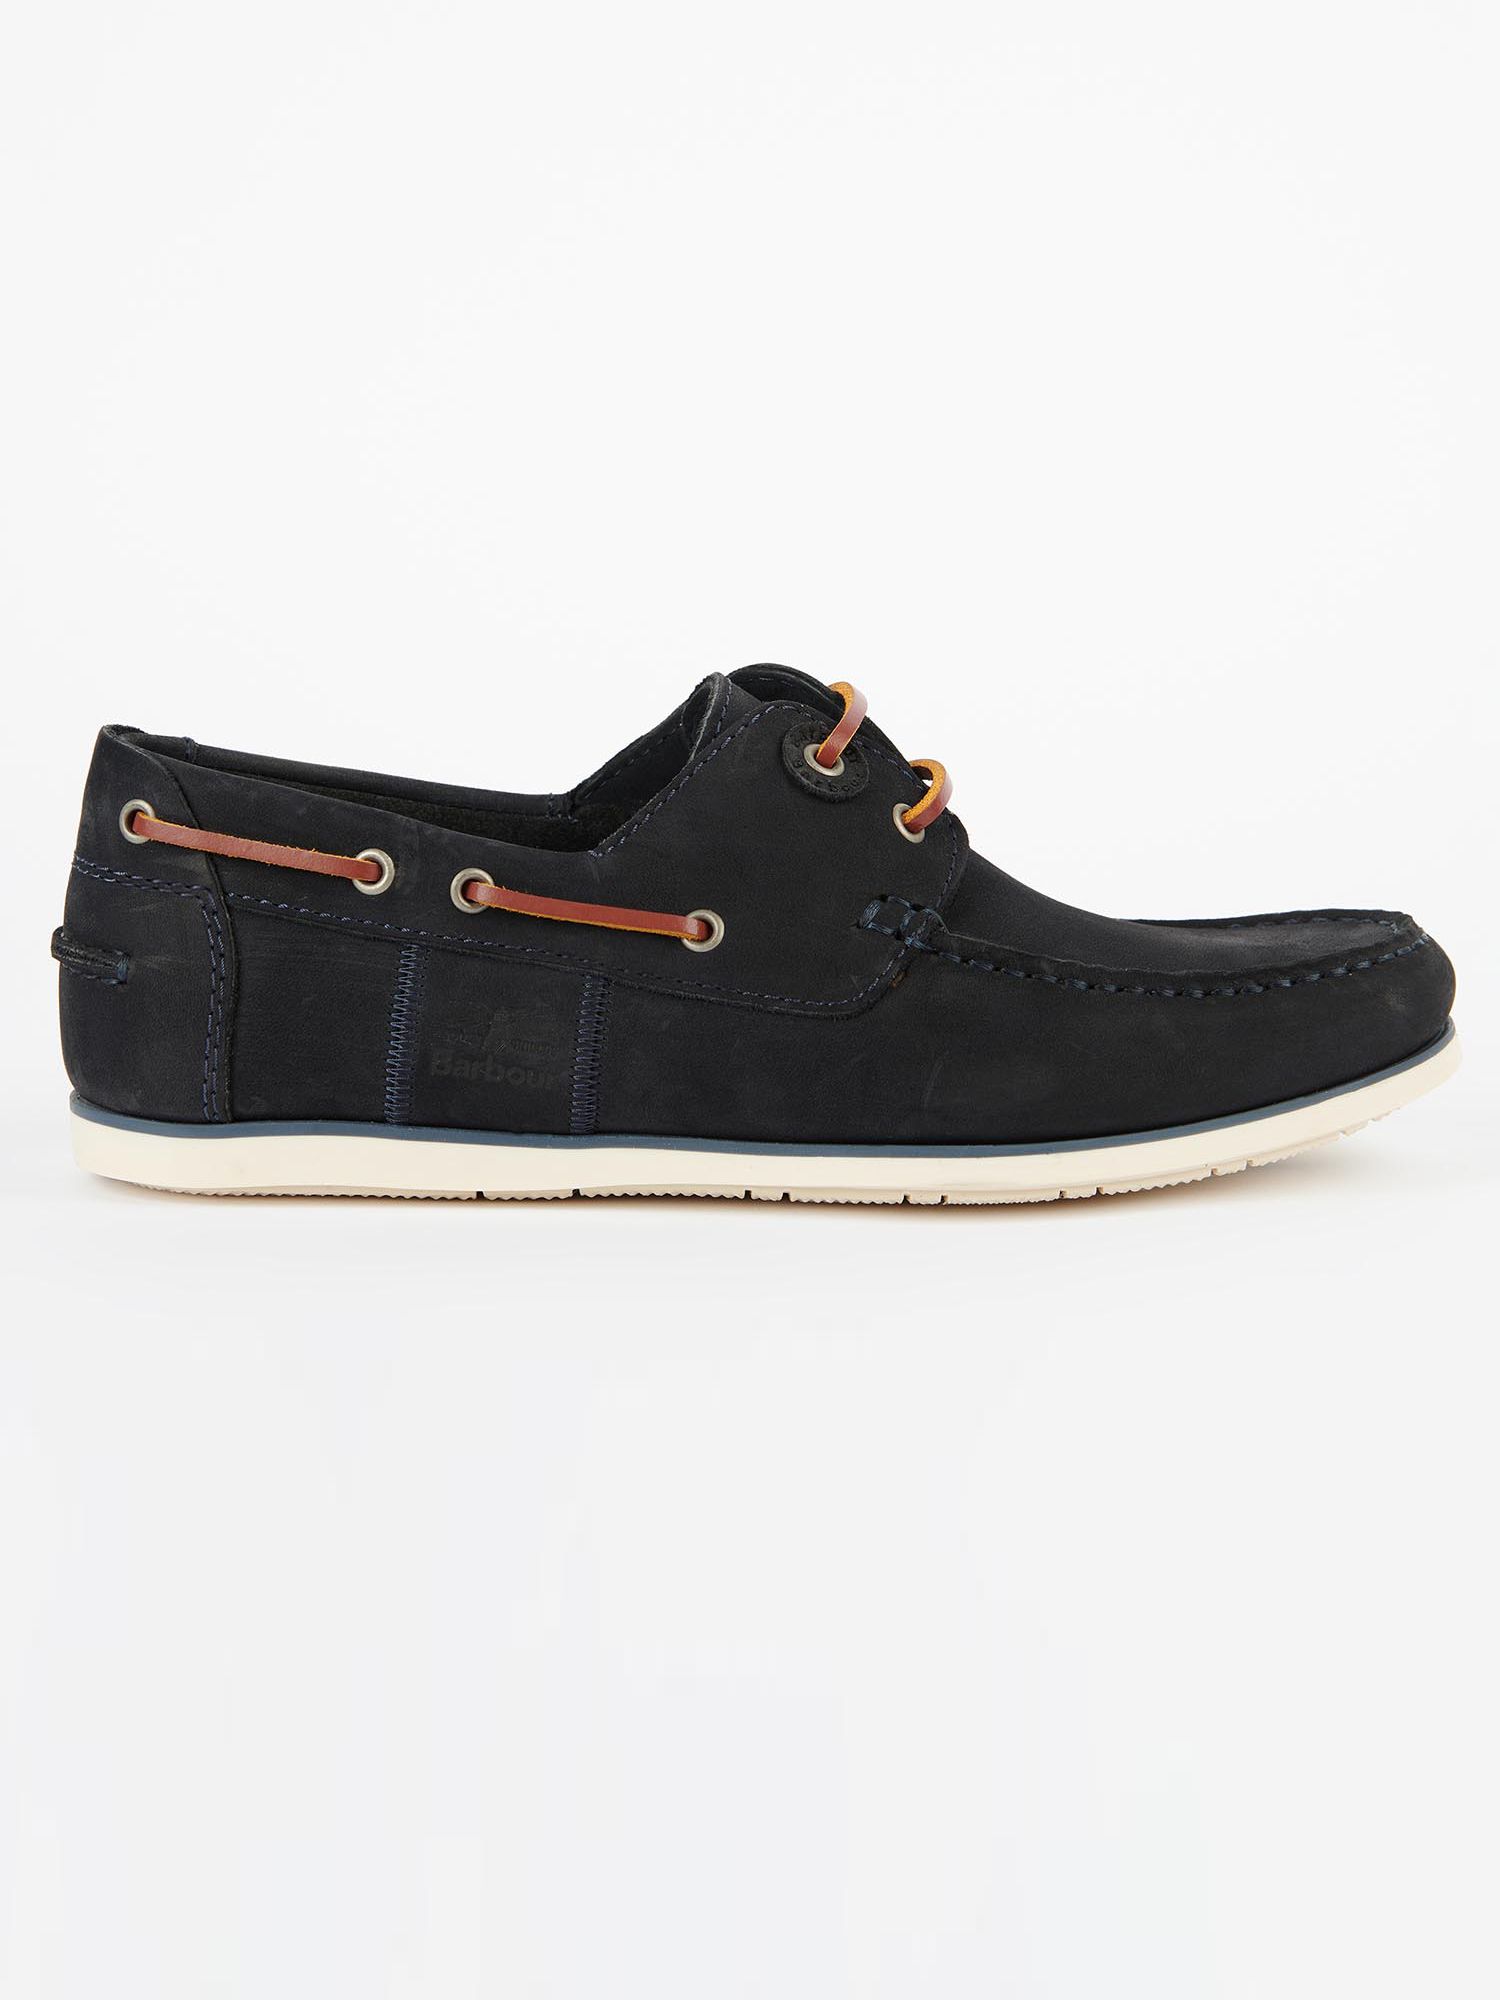 Barbour Capstan Leather Boat Shoes, Navy at John Lewis & Partners